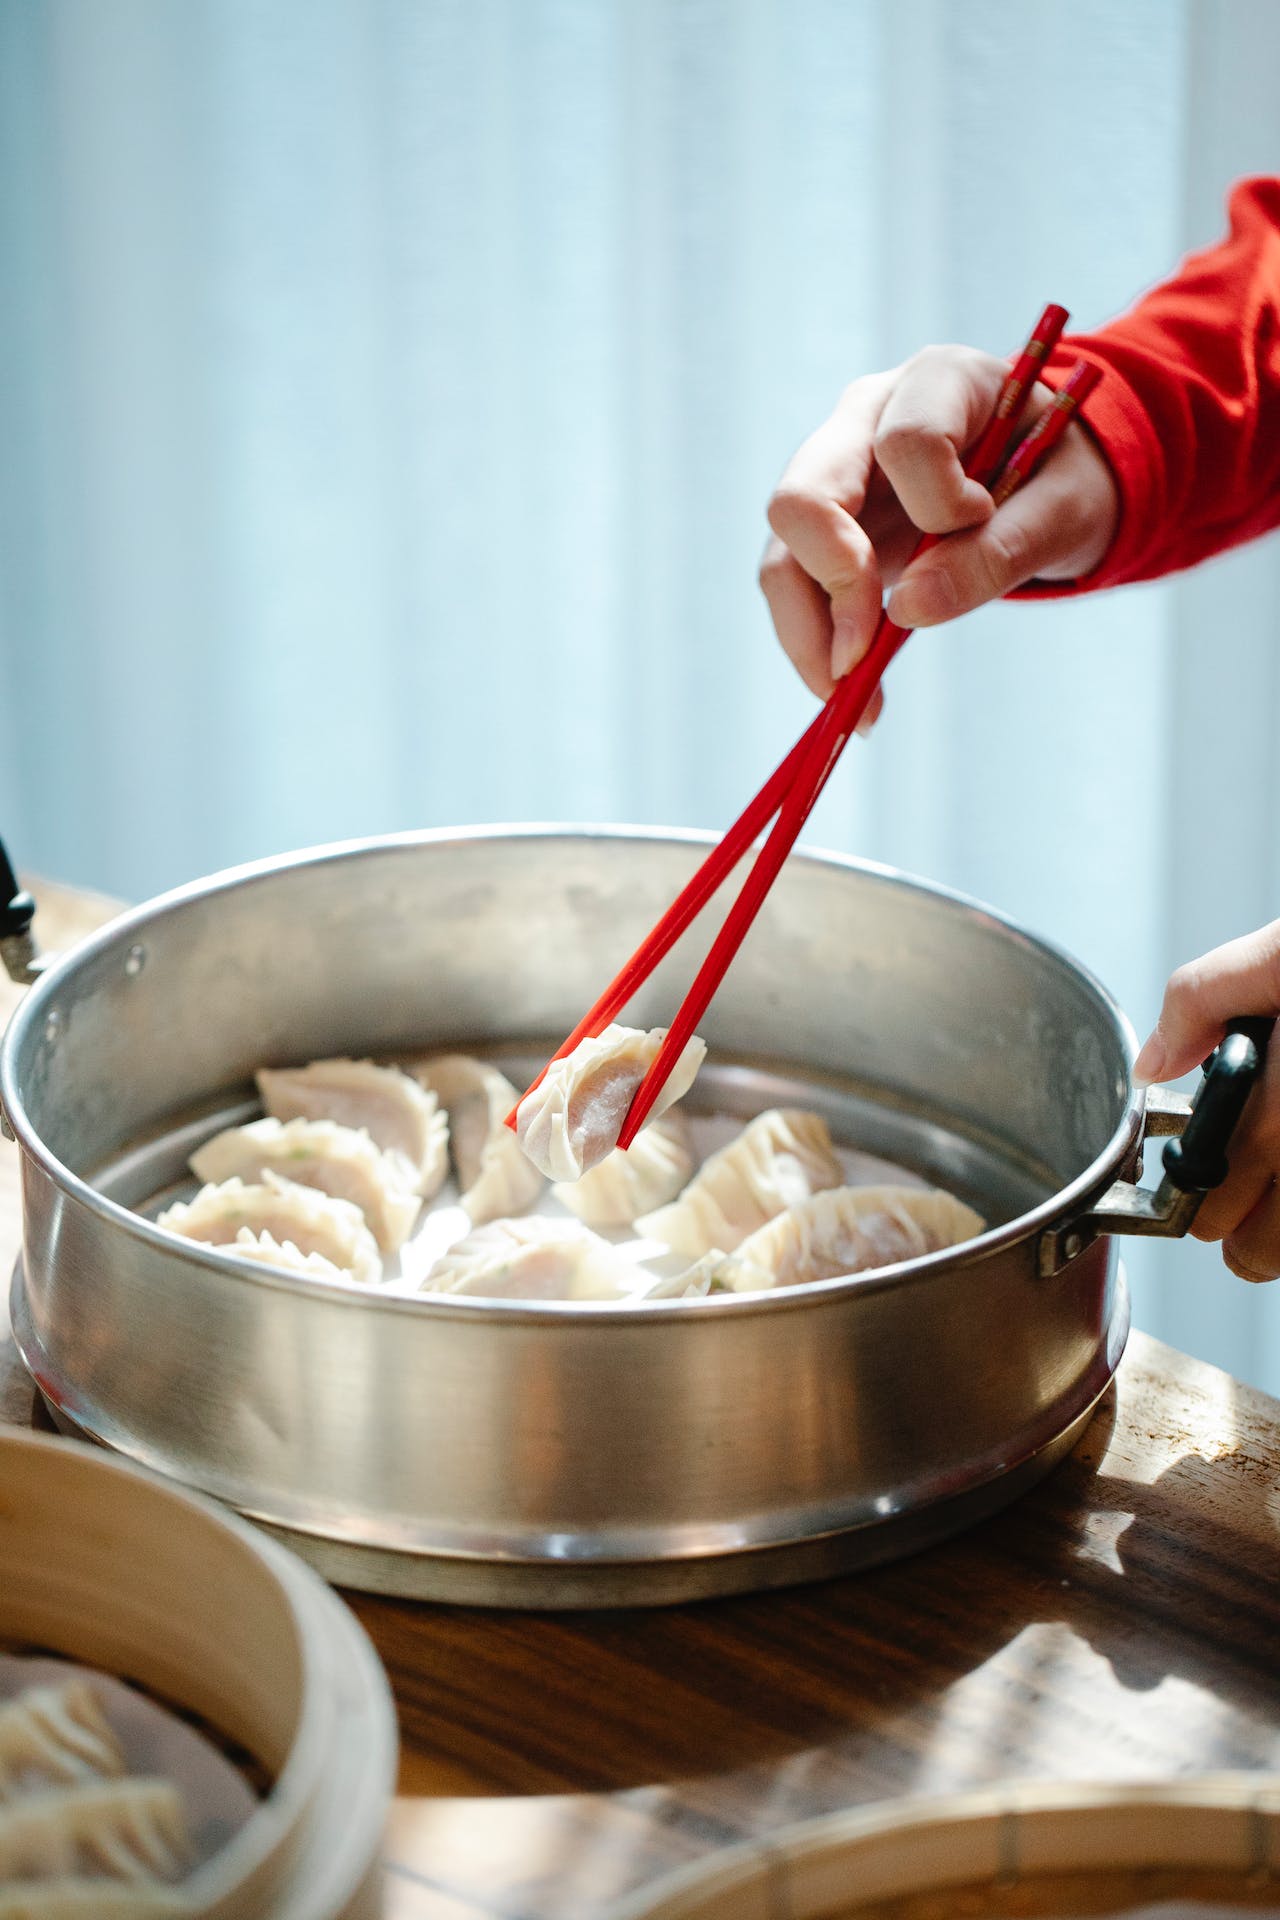 10 Things You Need to Consider Before Buying Electric Food Steamers